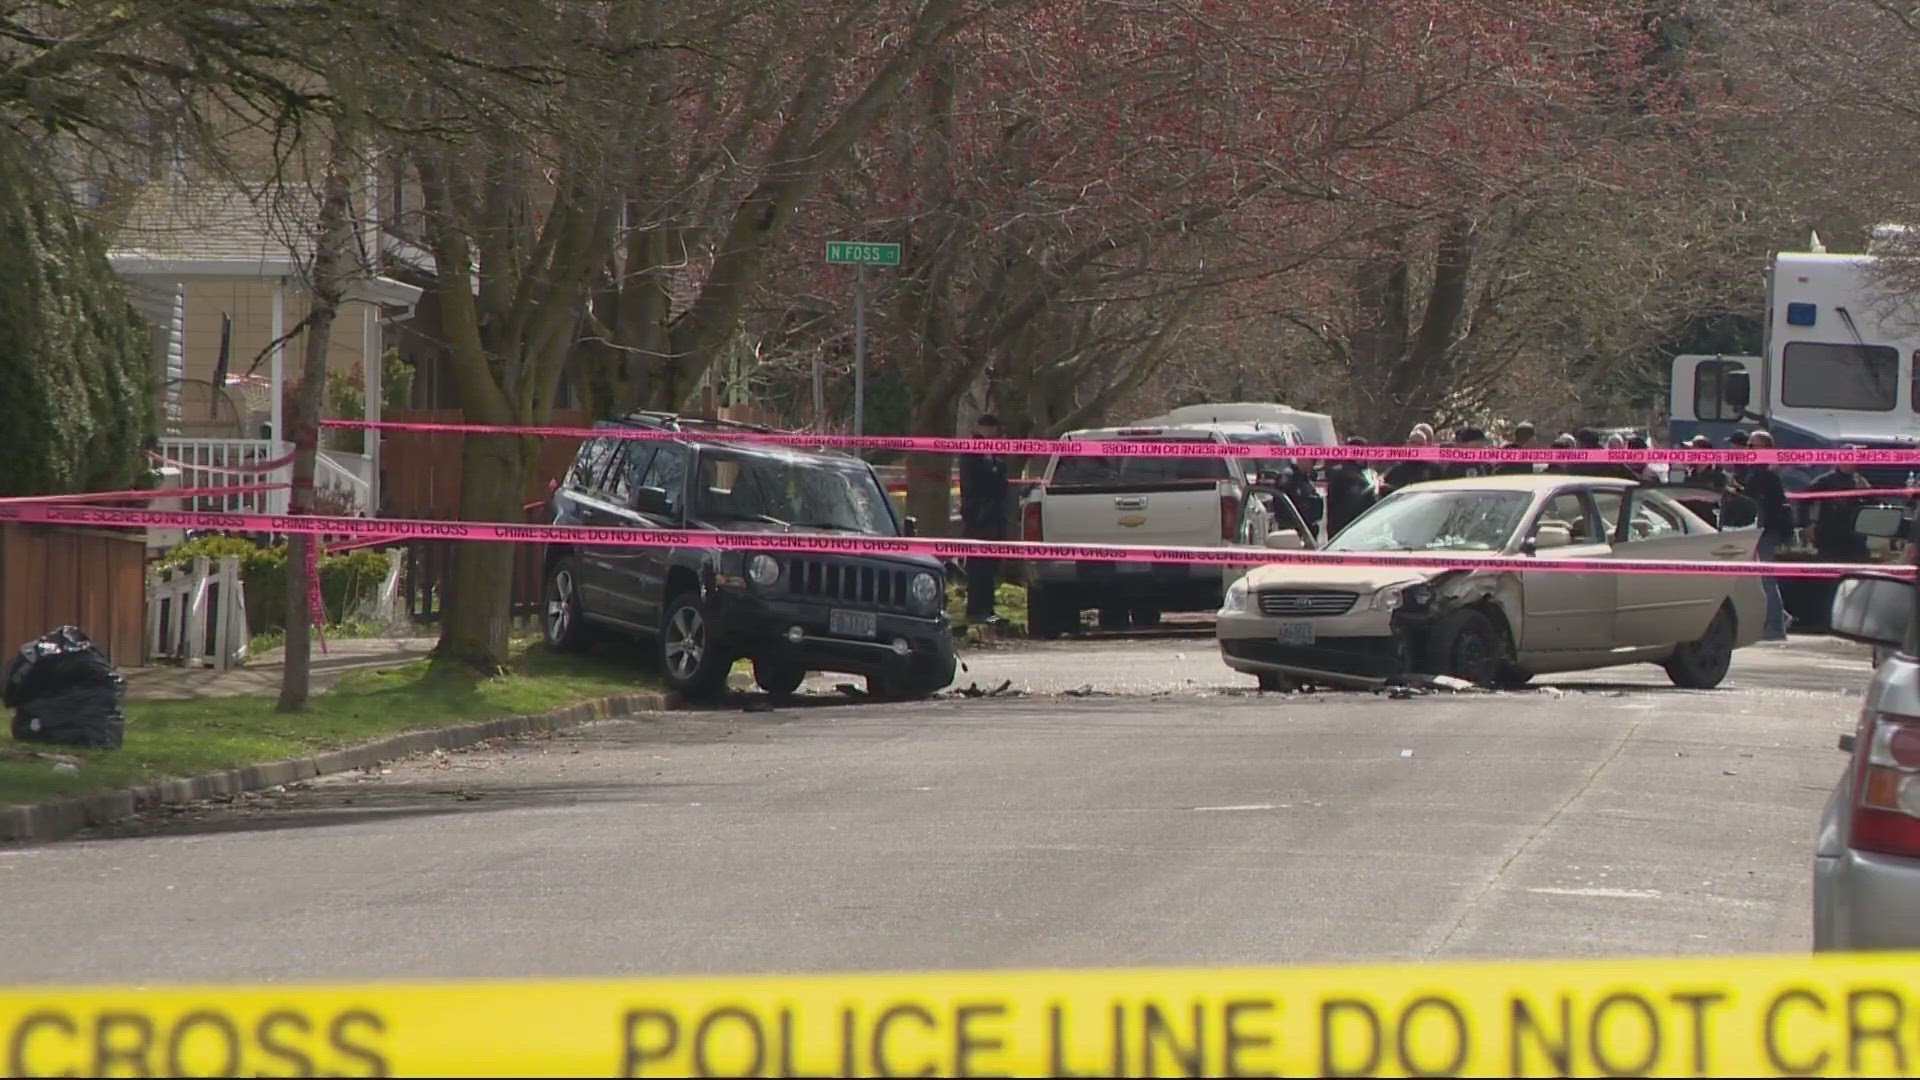 Saturday’s deadly shooting marked the city’s 15th, 16th and 17th homicides this year. It happened in a neighborhood next to a community center and a park.